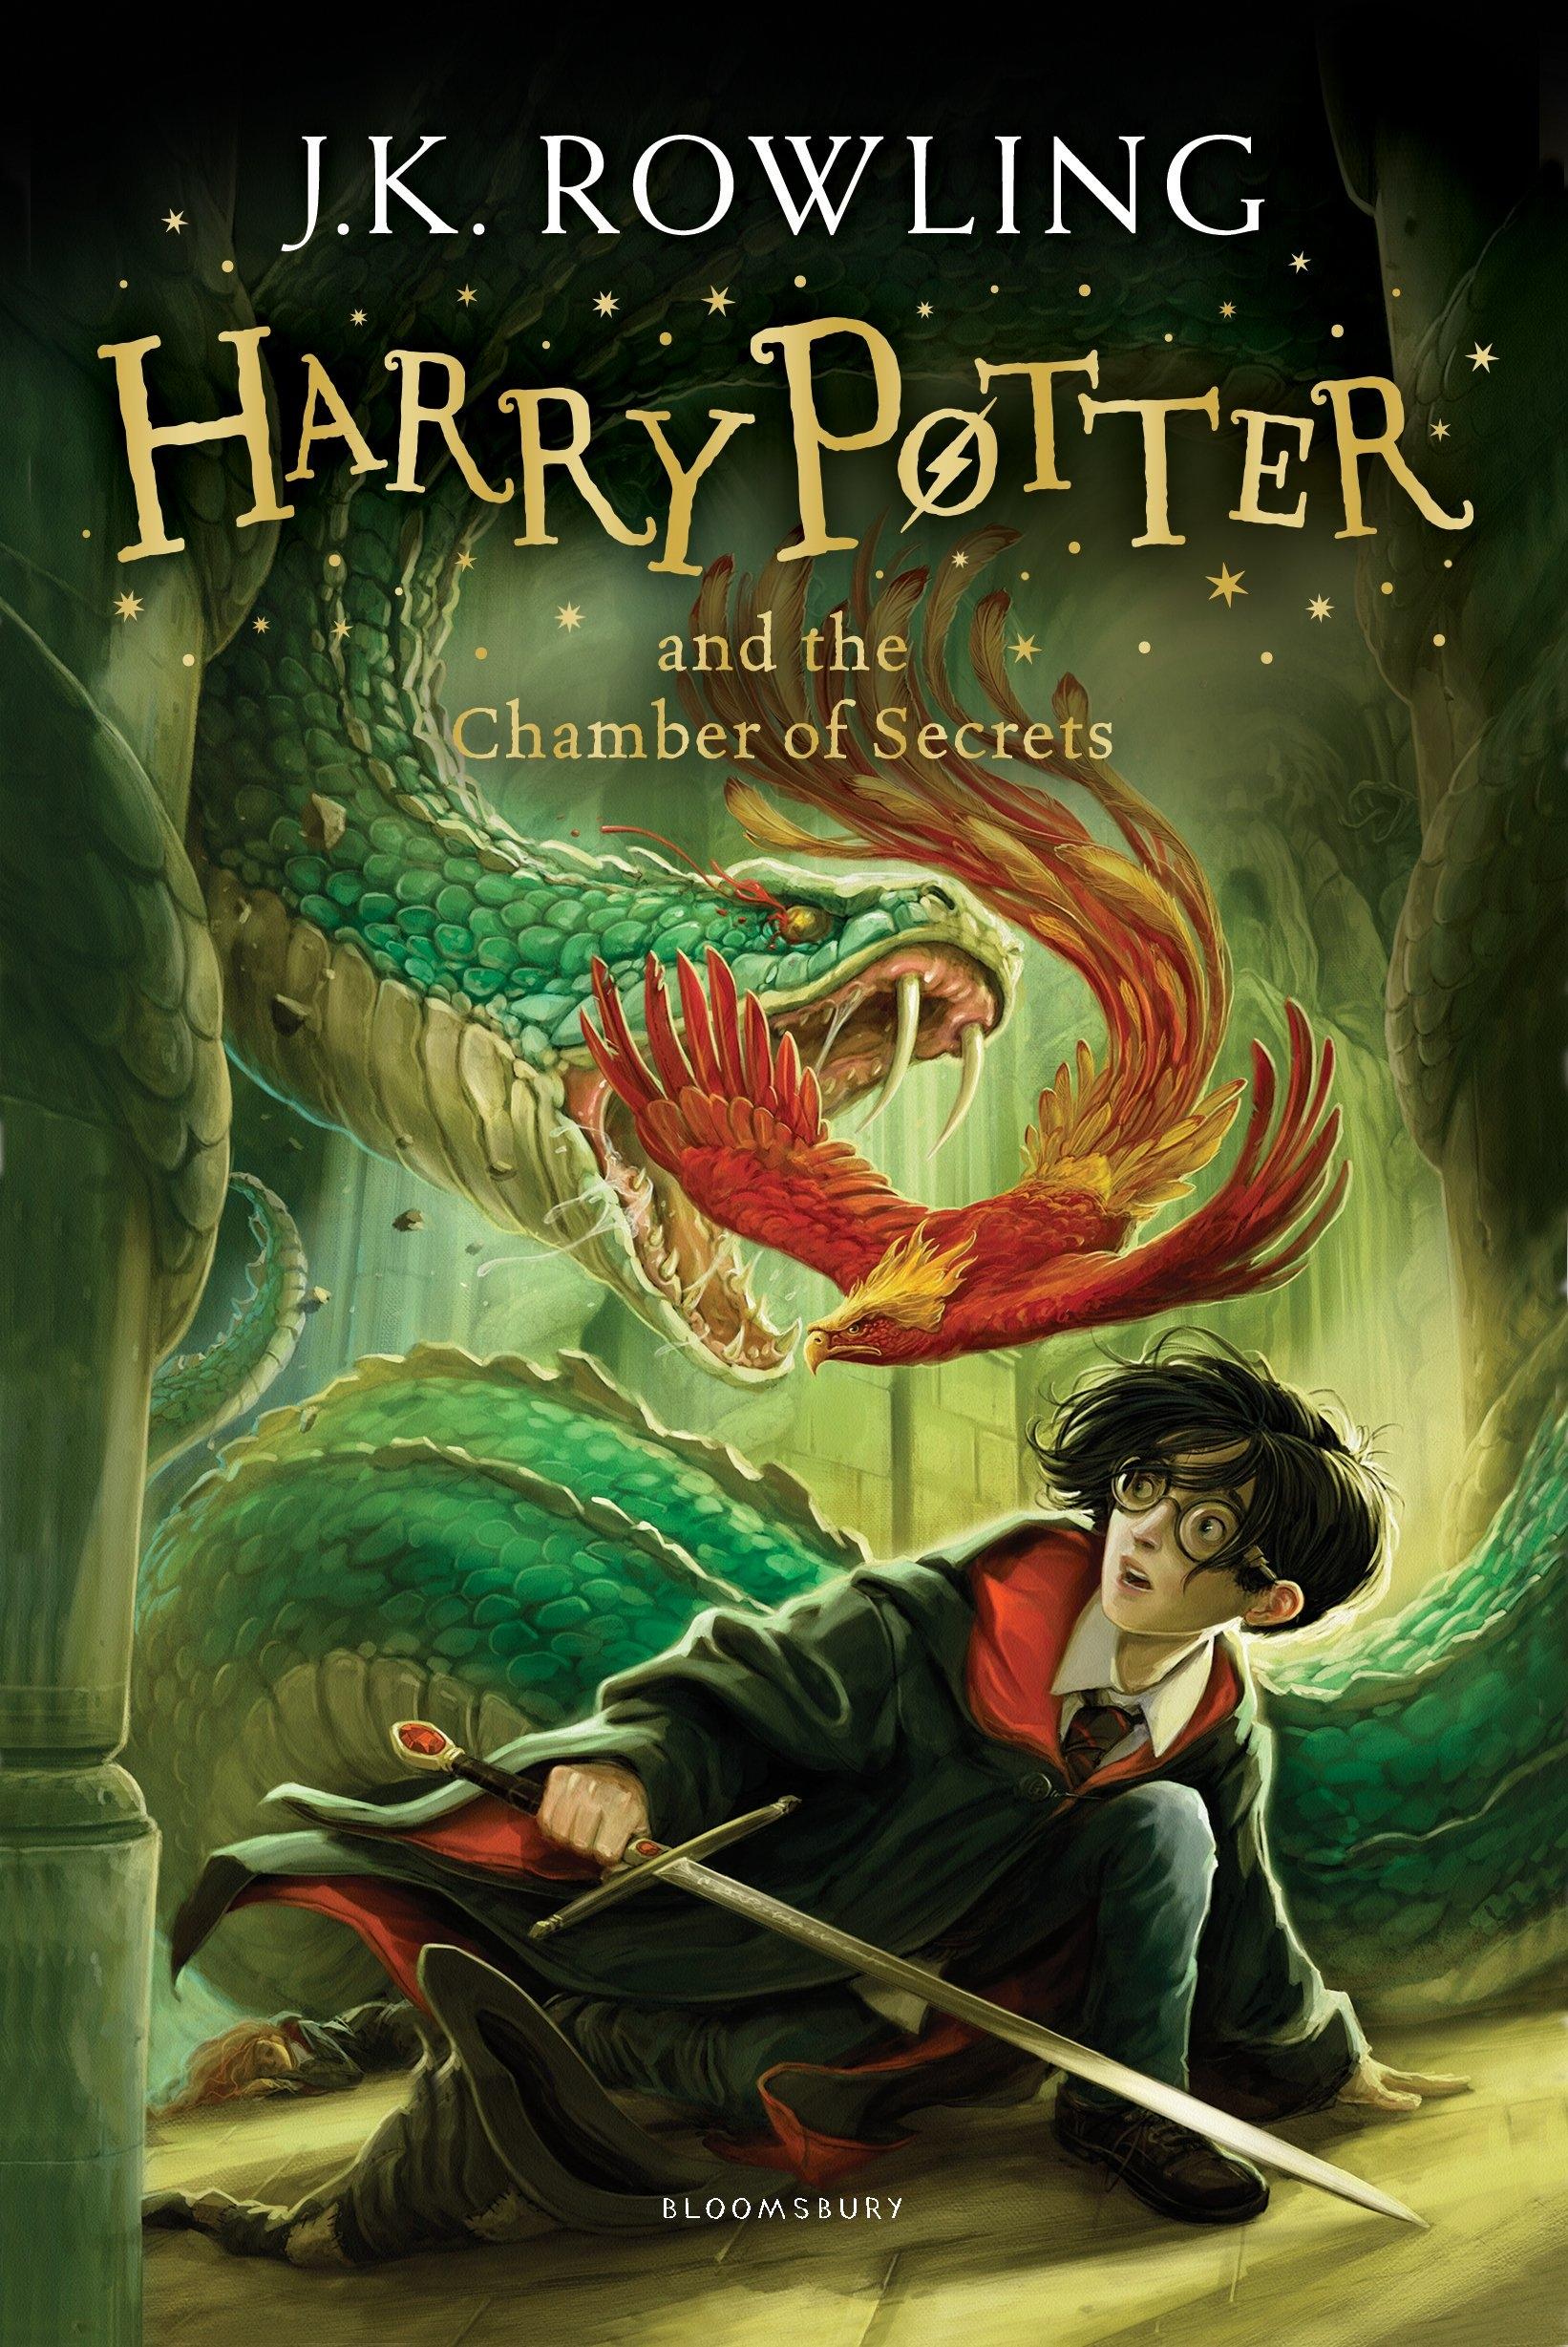 Harry Potter And The Chamber Of Secrets (Inglés) "Tomo 2"